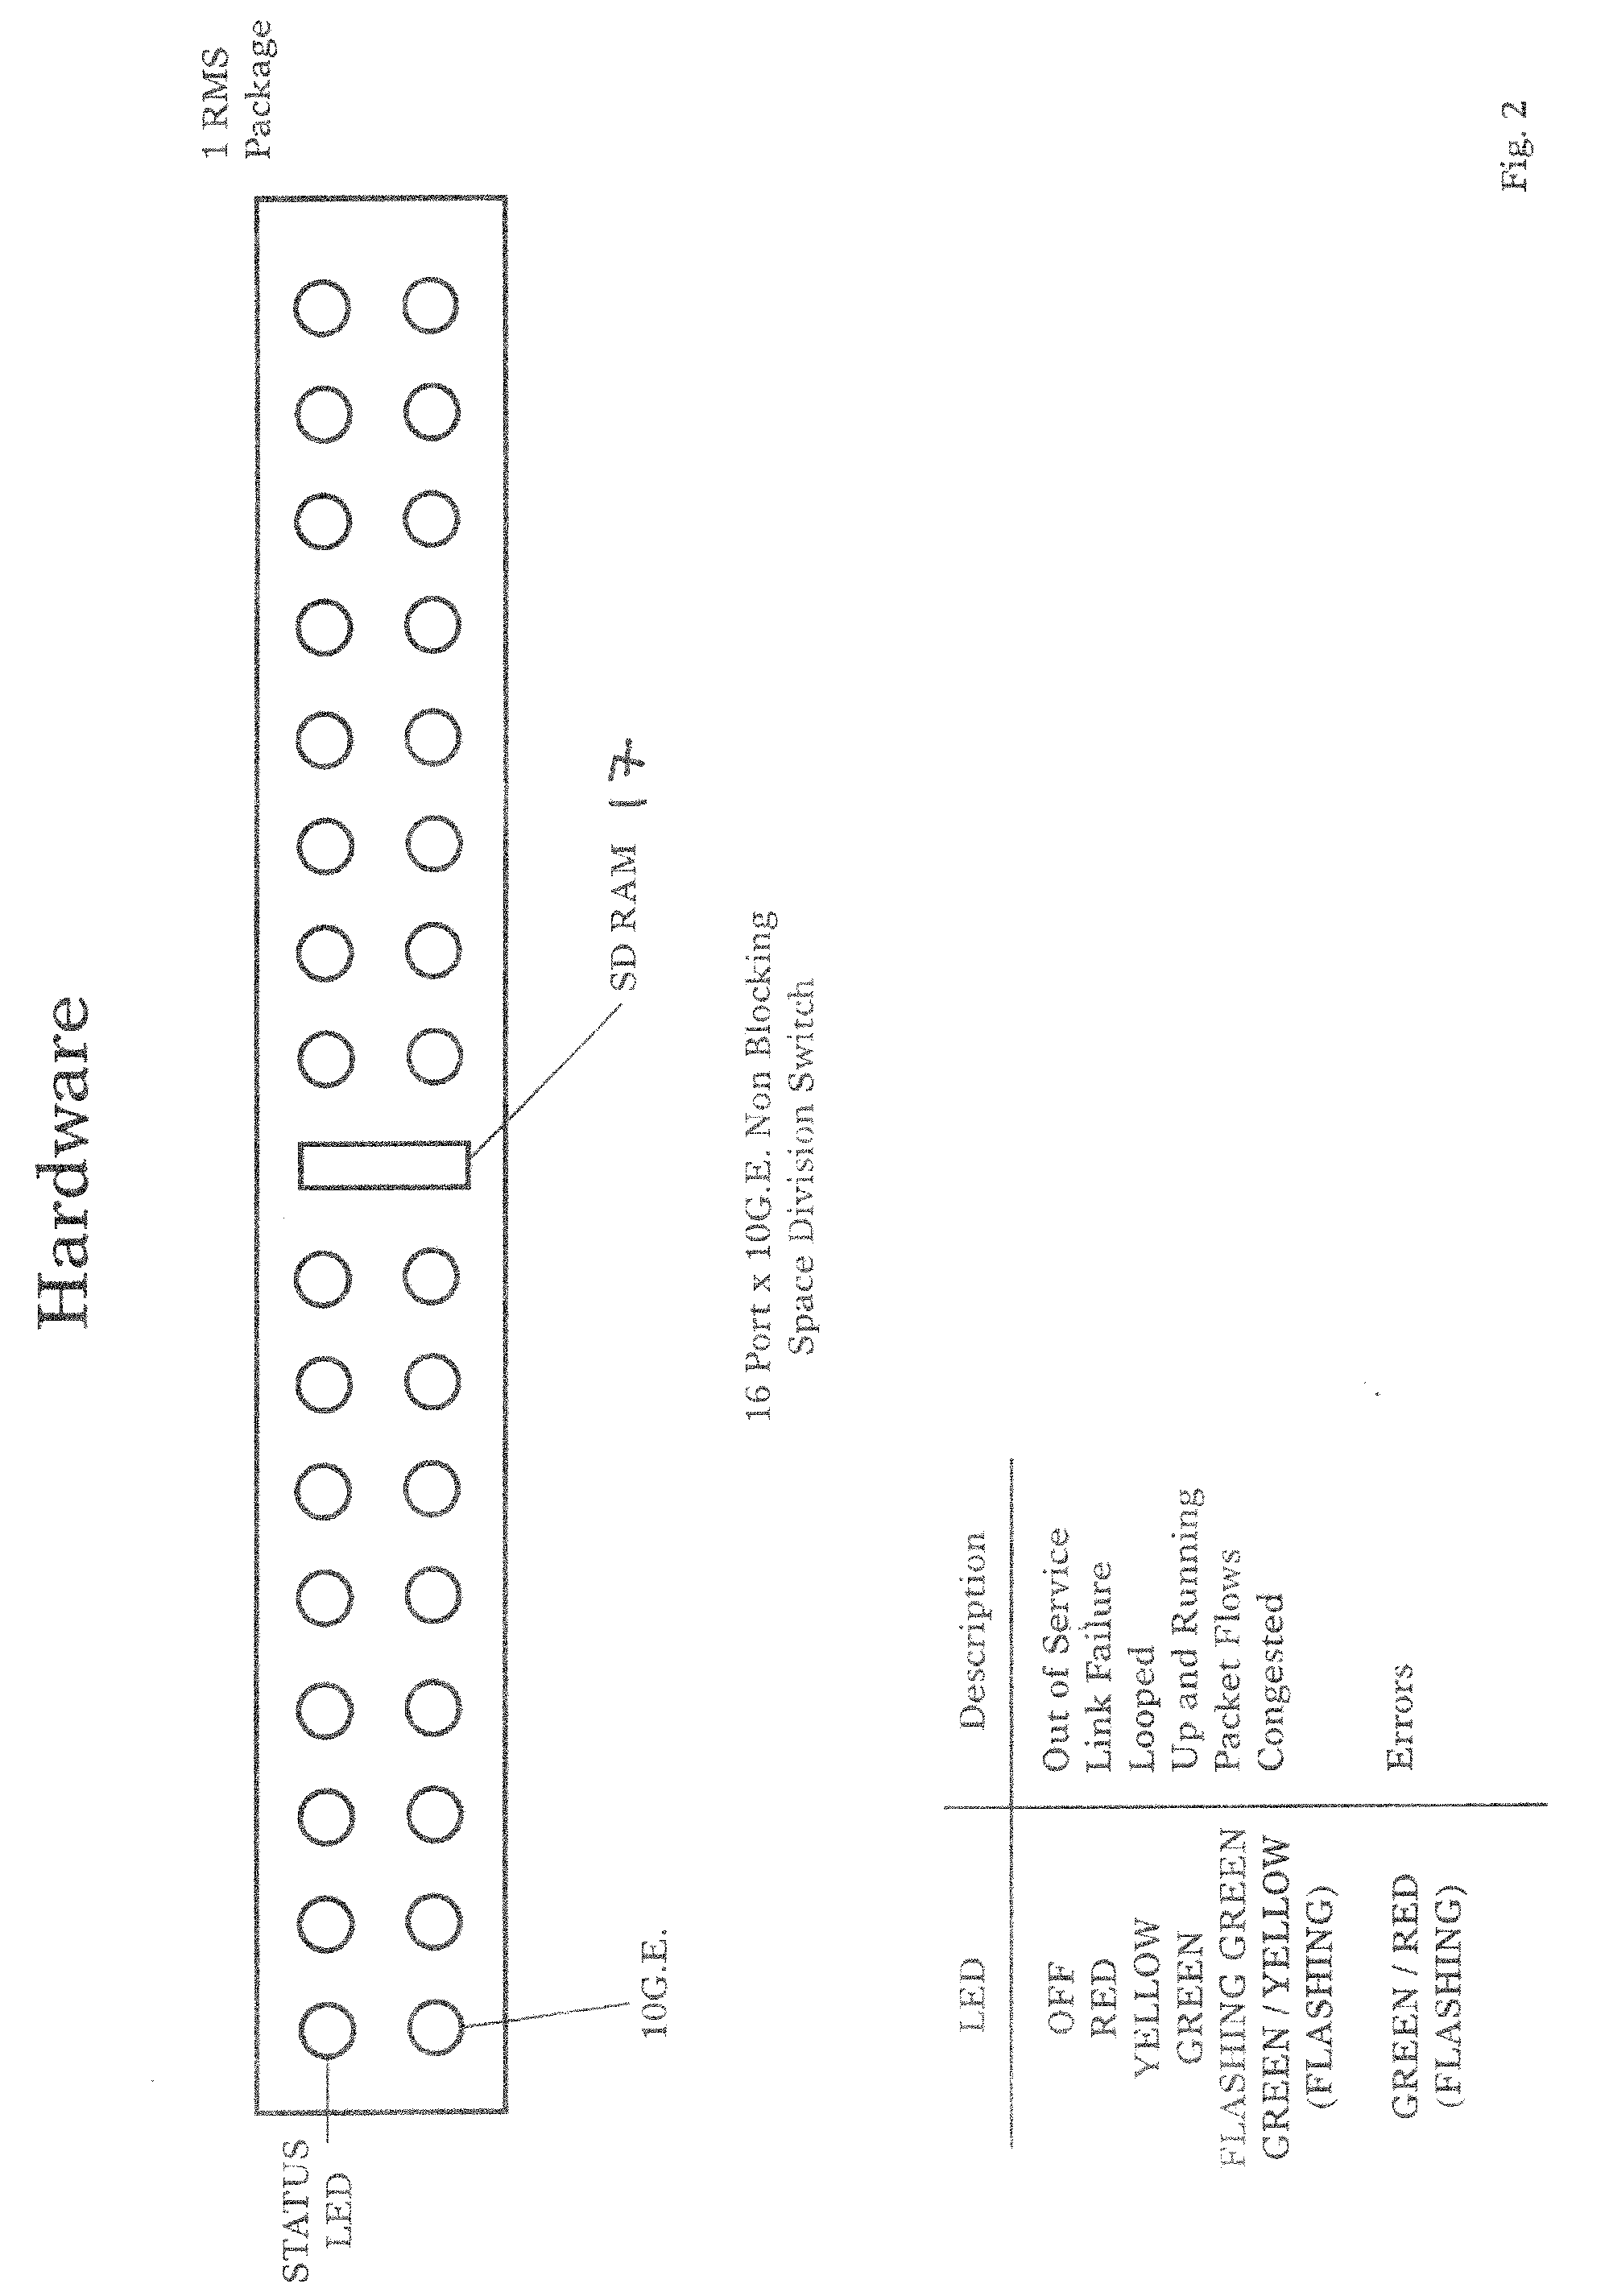 Self-Routed Layer 4 Packet Network System and Method